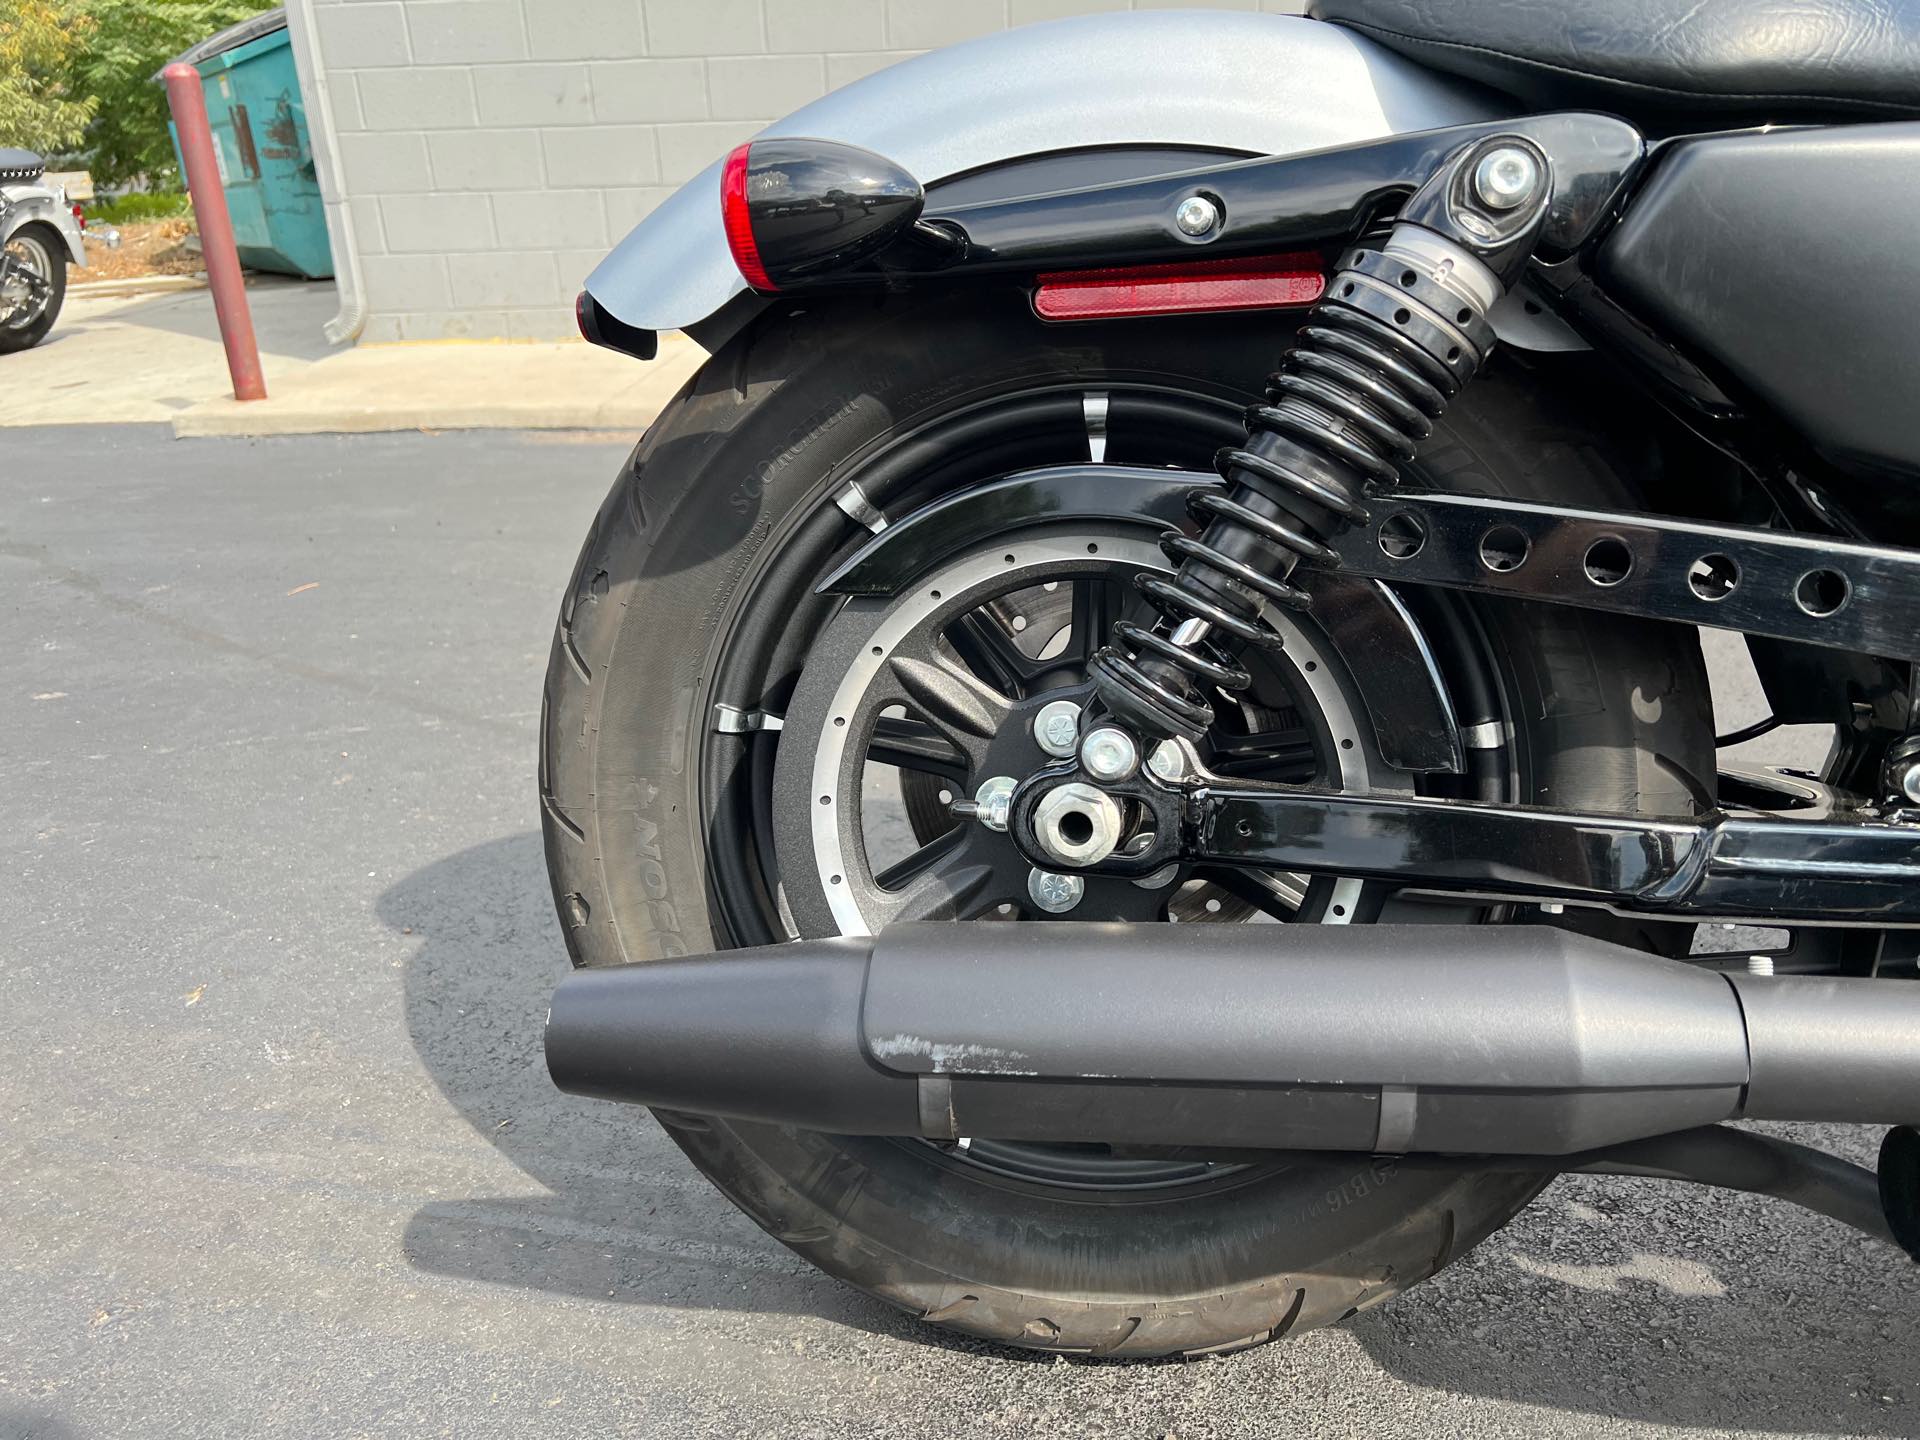 2020 Harley-Davidson Sportster Iron 883 at Aces Motorcycles - Fort Collins